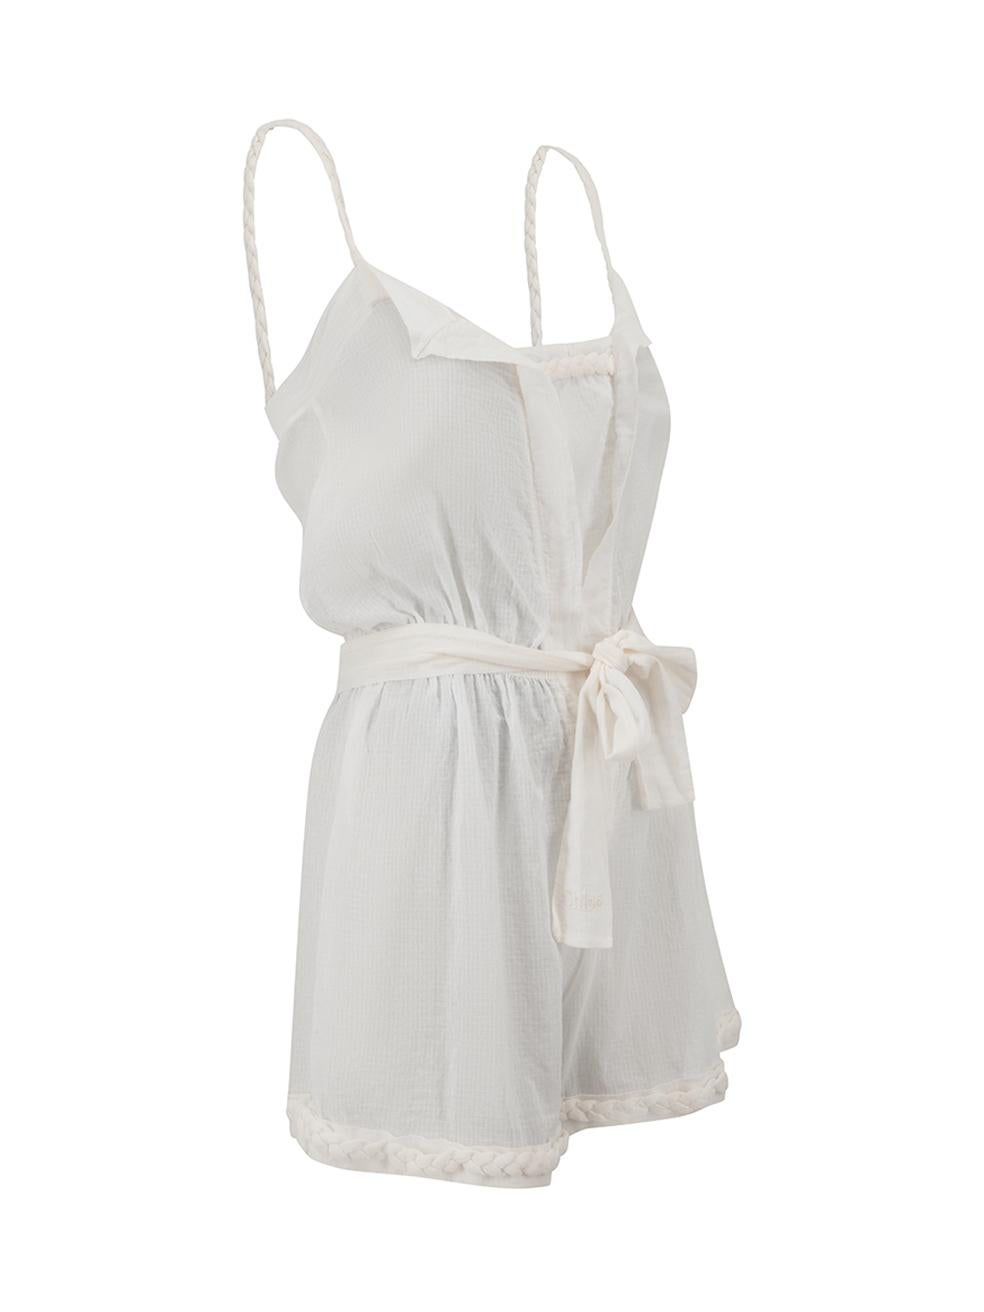 CONDITION is Good. Minor wear to playsuit is evident. Light wear to fabric with some loose thread ends at seams throughout on this used Chloé designer resale item.



Details


White

Cotton

Sleeveless playsuit

Sheer

Braided accent

Elasticated